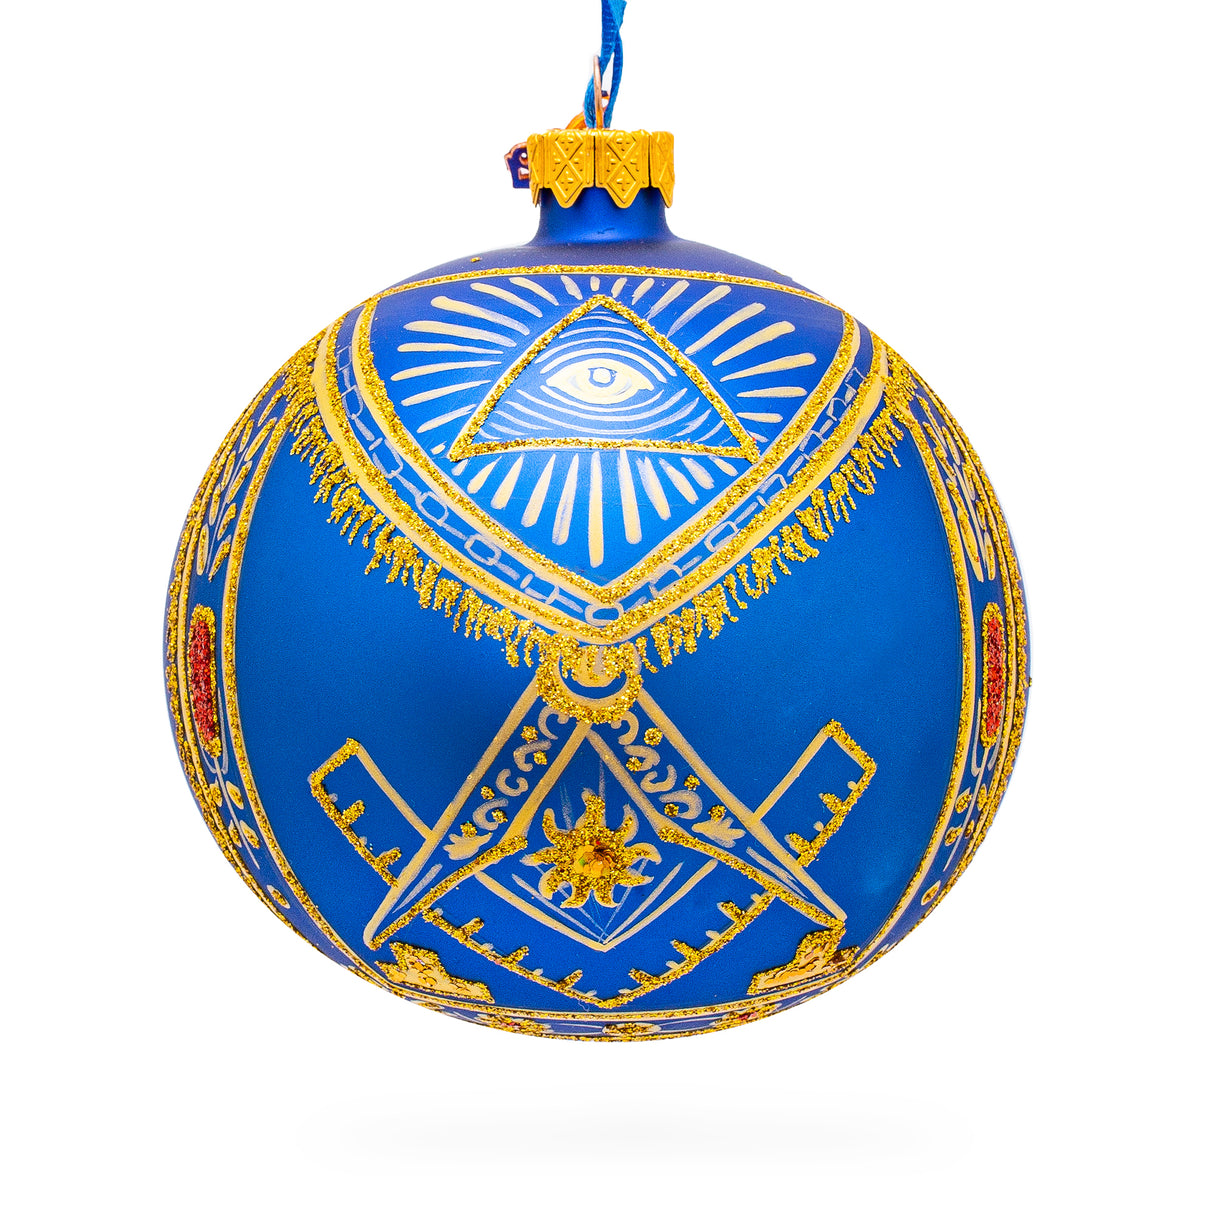 Freemasons Symbols Glass Ball Christmas Ornament 4 Inches in Blue color, Round shape